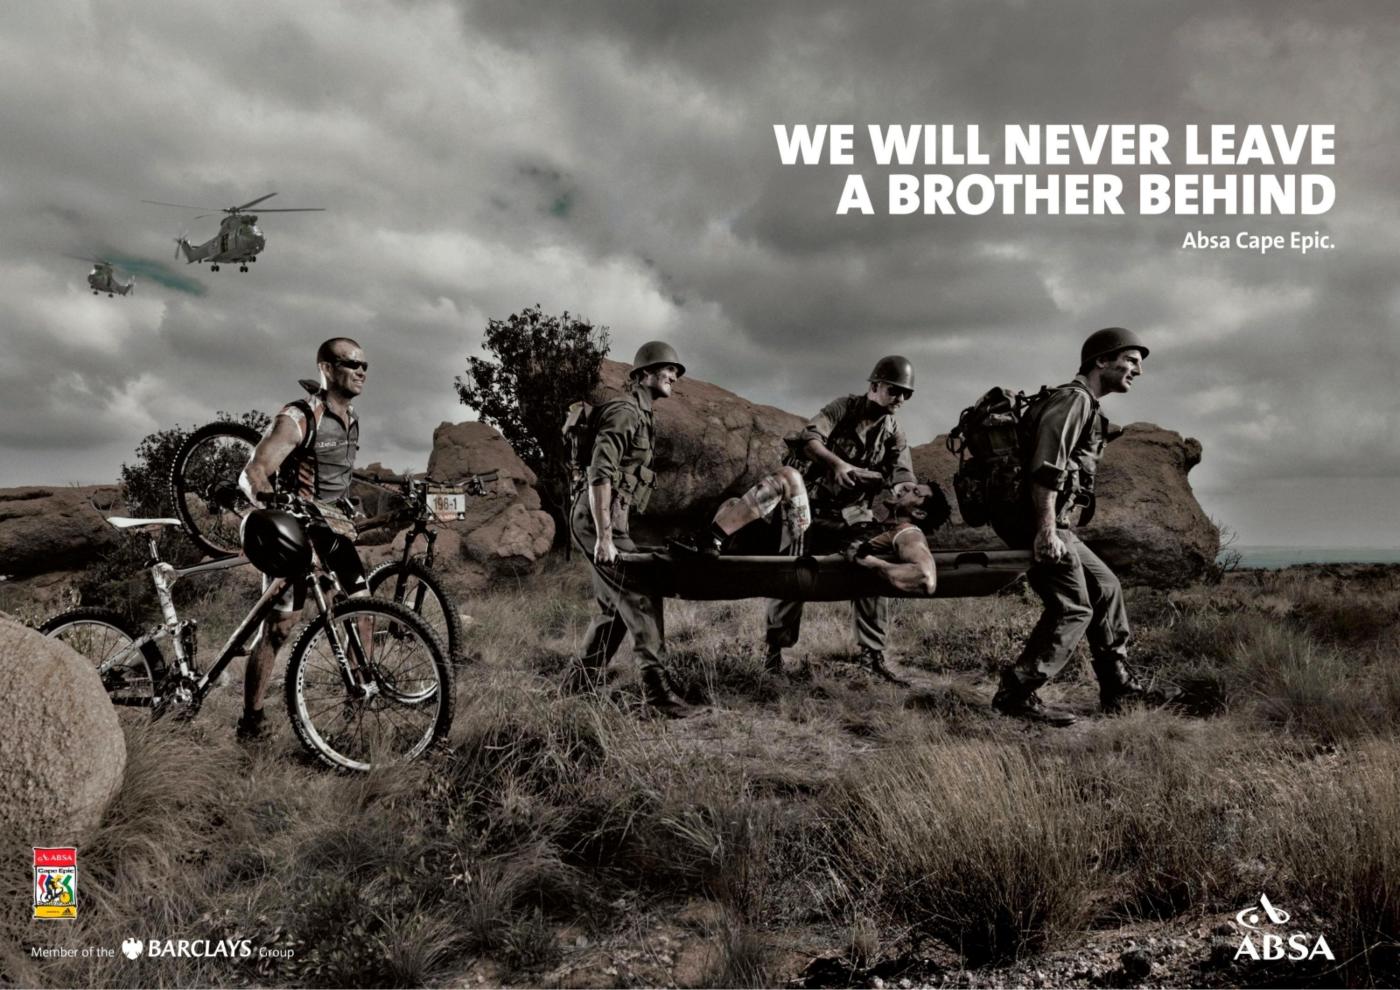 We will never leave a brother behind